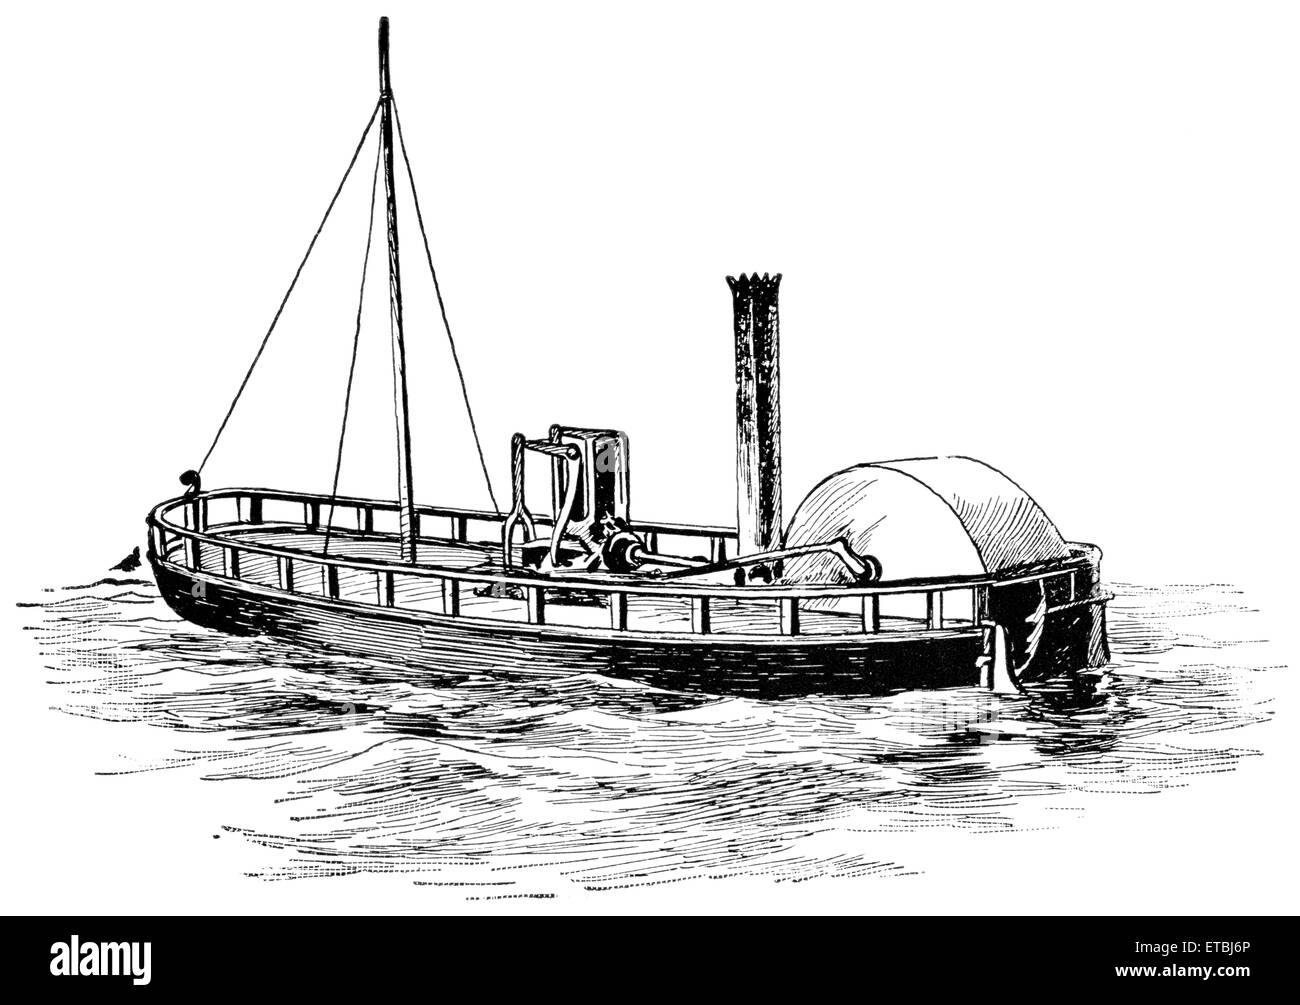 The Charlotte Dundas, First Steamboat launched by William Symington, England, 1801, 'Classical Portfolio of Primitive Carriers', by Marshall M. Kirman, World Railway Publ. Co., Illustration, 1895 Stock Photo